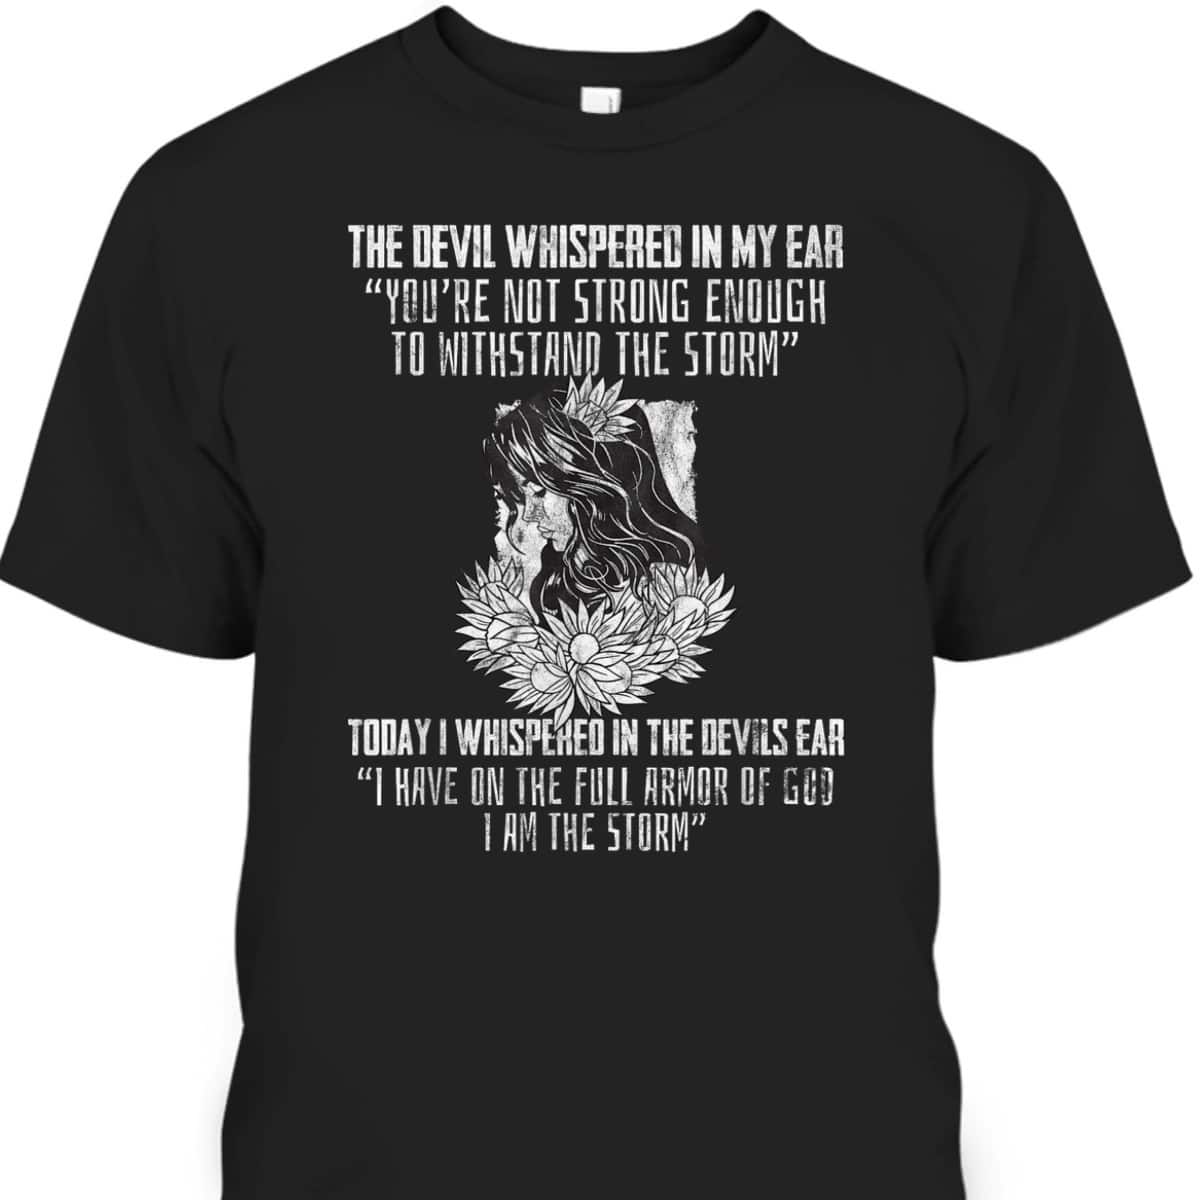 I Have On The Full Armor Of God I Am The Storm T-Shirt Perfect Gift For Christians And Believers